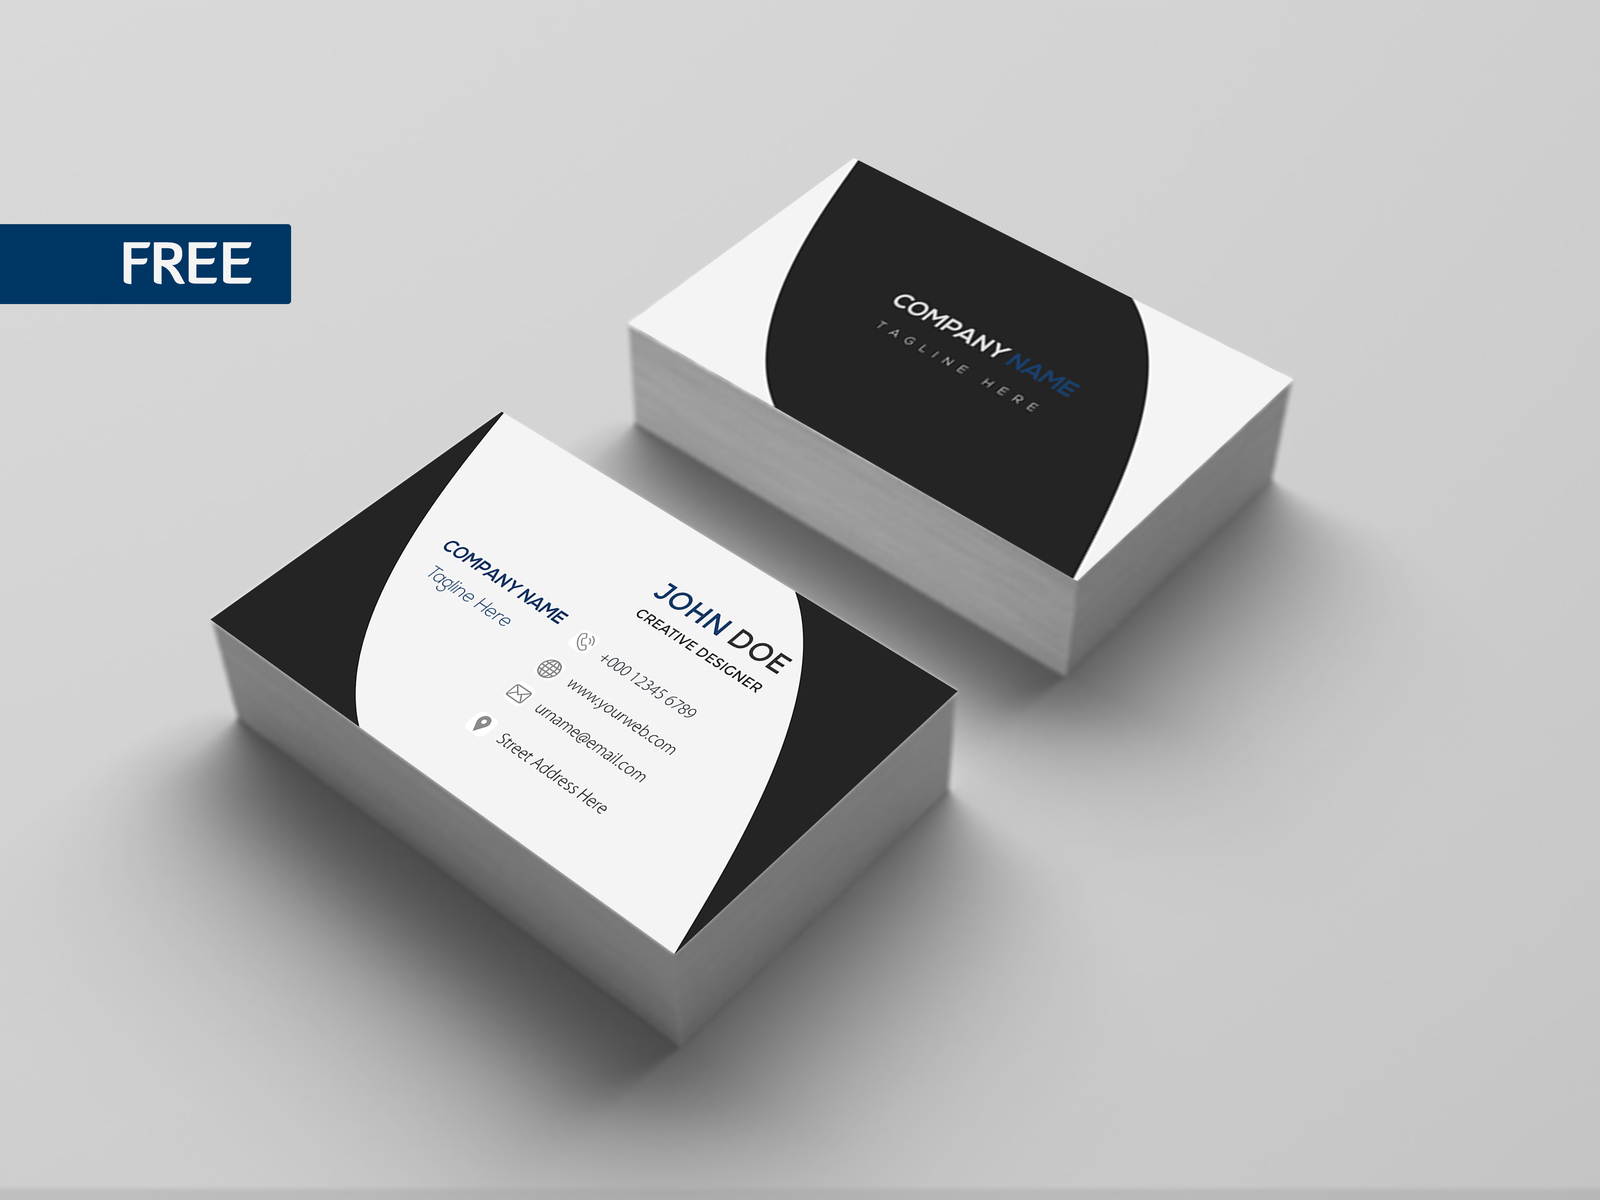 FREE Business card Template (22) by Syeda Junia on Dribbble Within Company Business Cards Templates